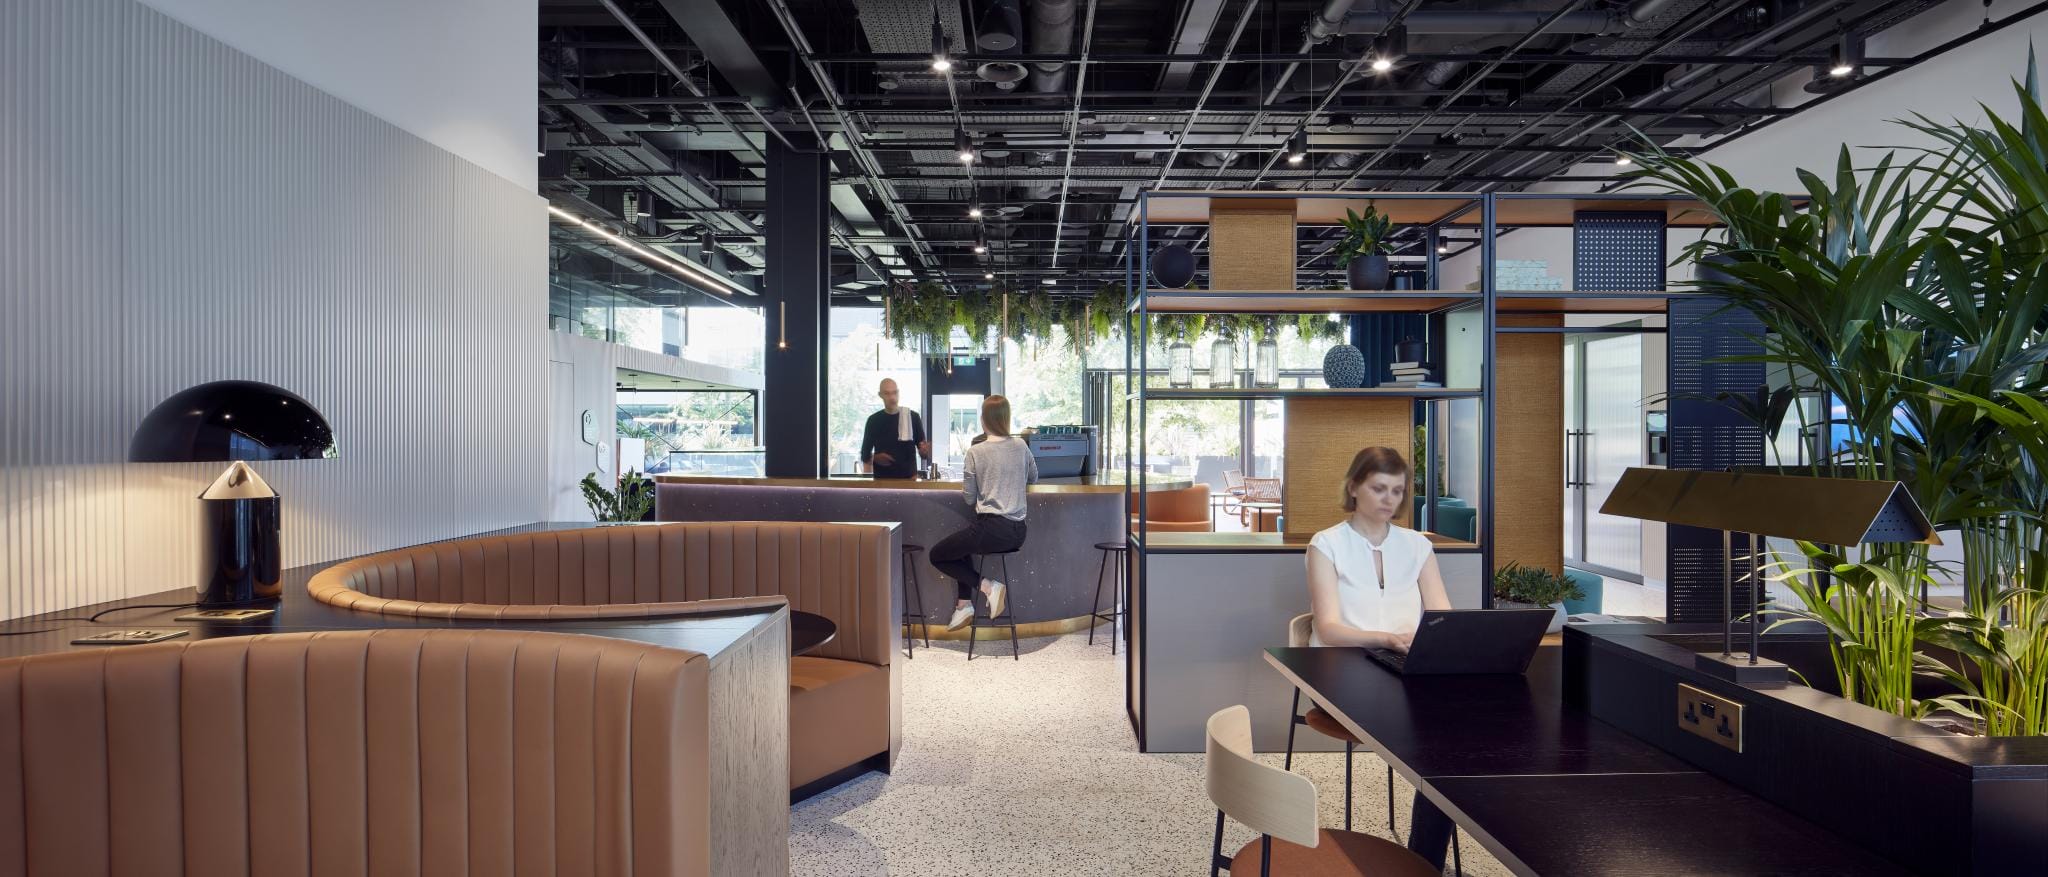 The power of a well-designed workplace to support productivity